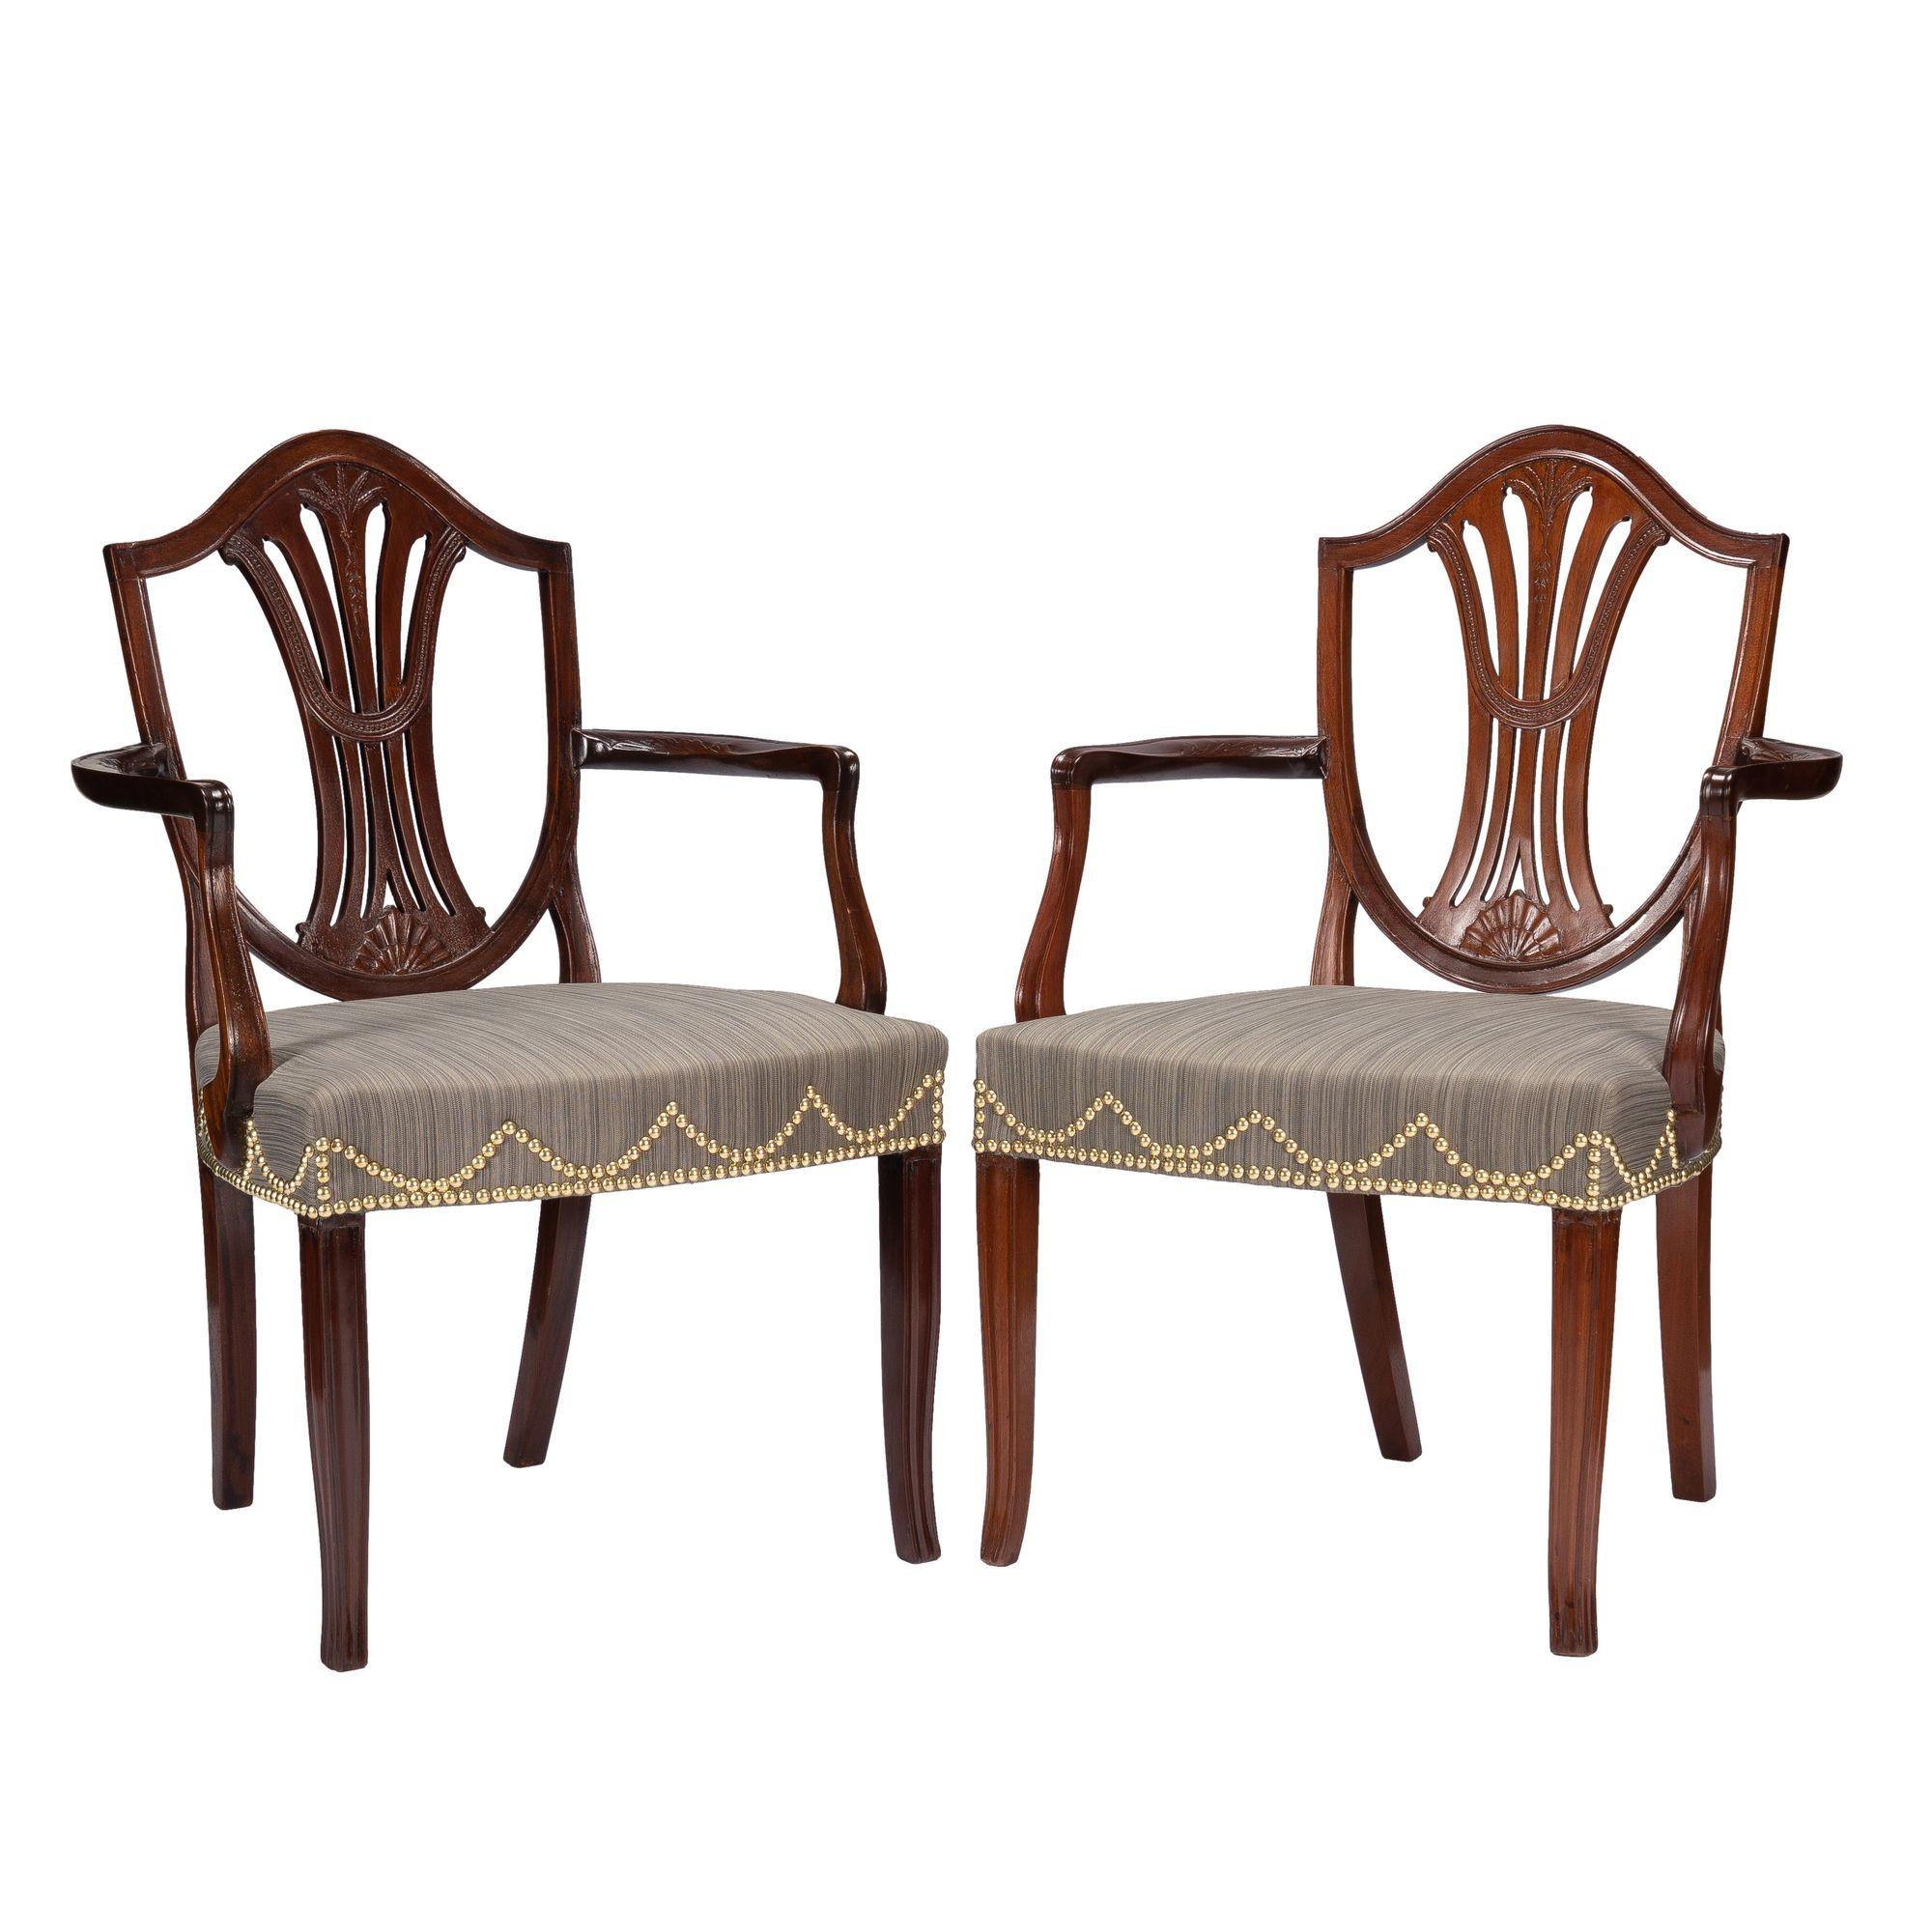 Pair of generously proportioned English Sheraton mahogany shield back arm chairs with over rail upholstered seats. The chair backs are detailed with a finely carved rice sheaf above a bell flower in the center of the vertical back splat. The elbow